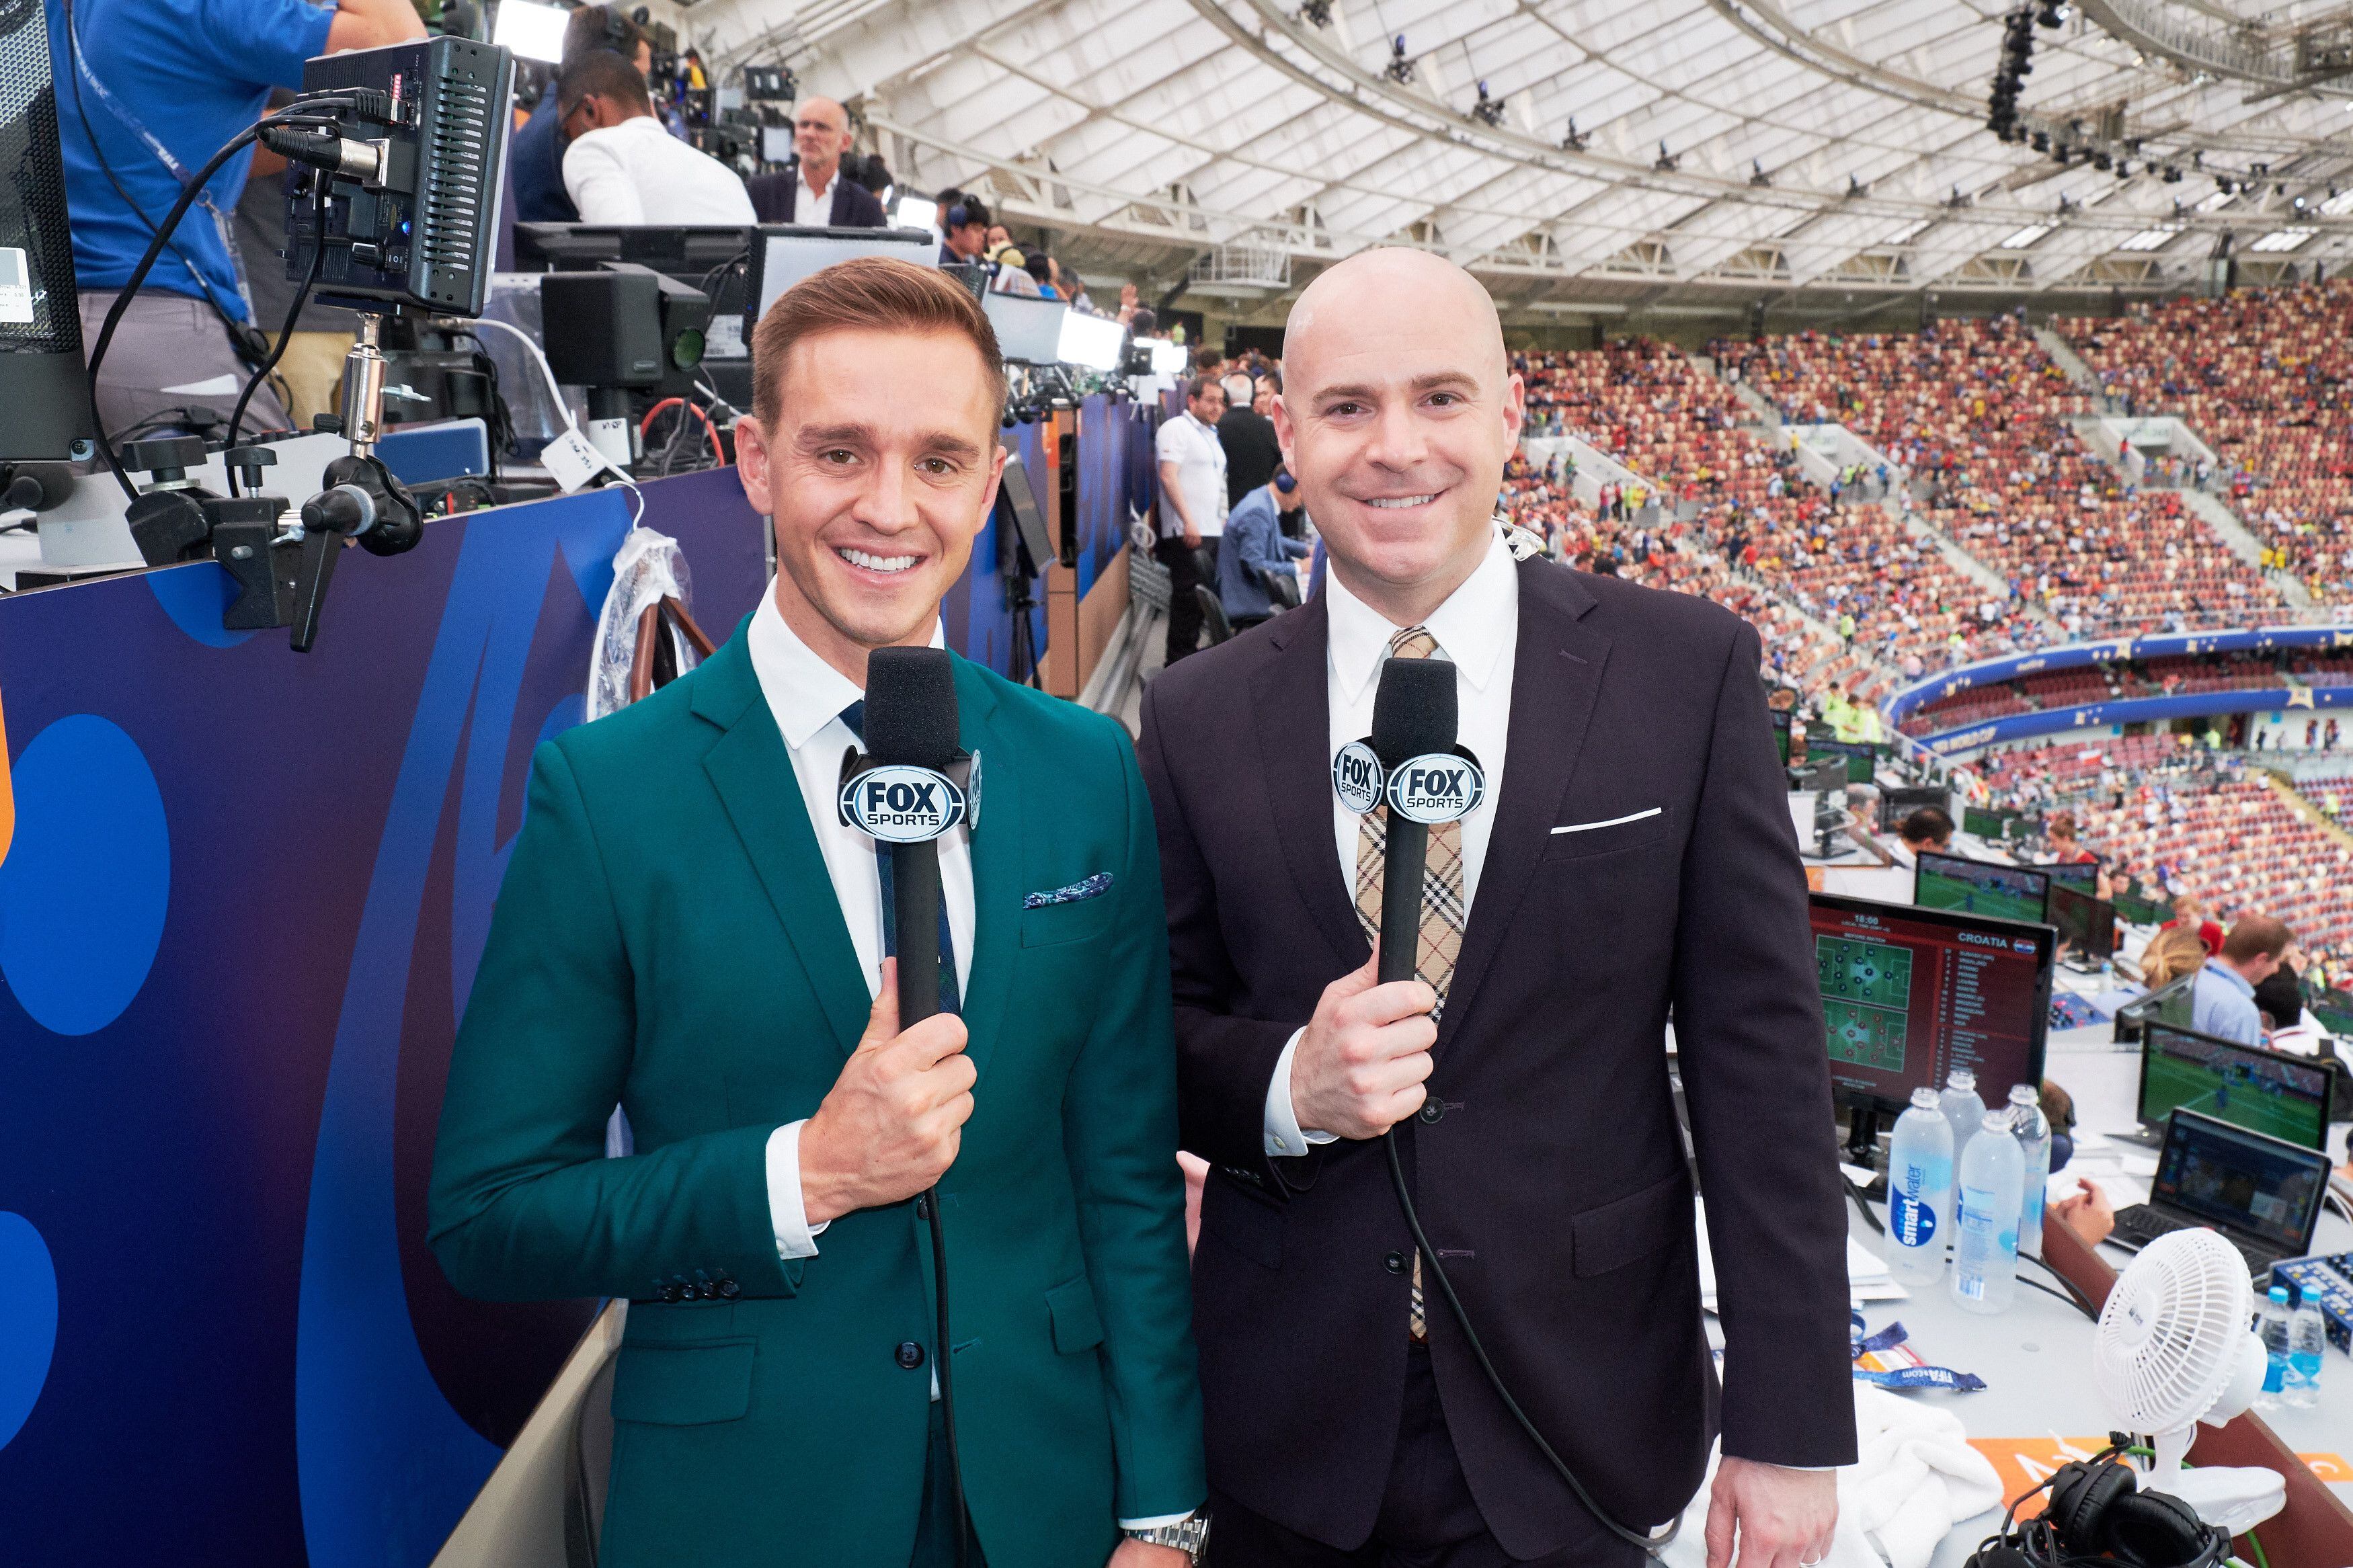 How to watch the FIFA World Cup in the U.S. via Telemundo :: Live Soccer TV